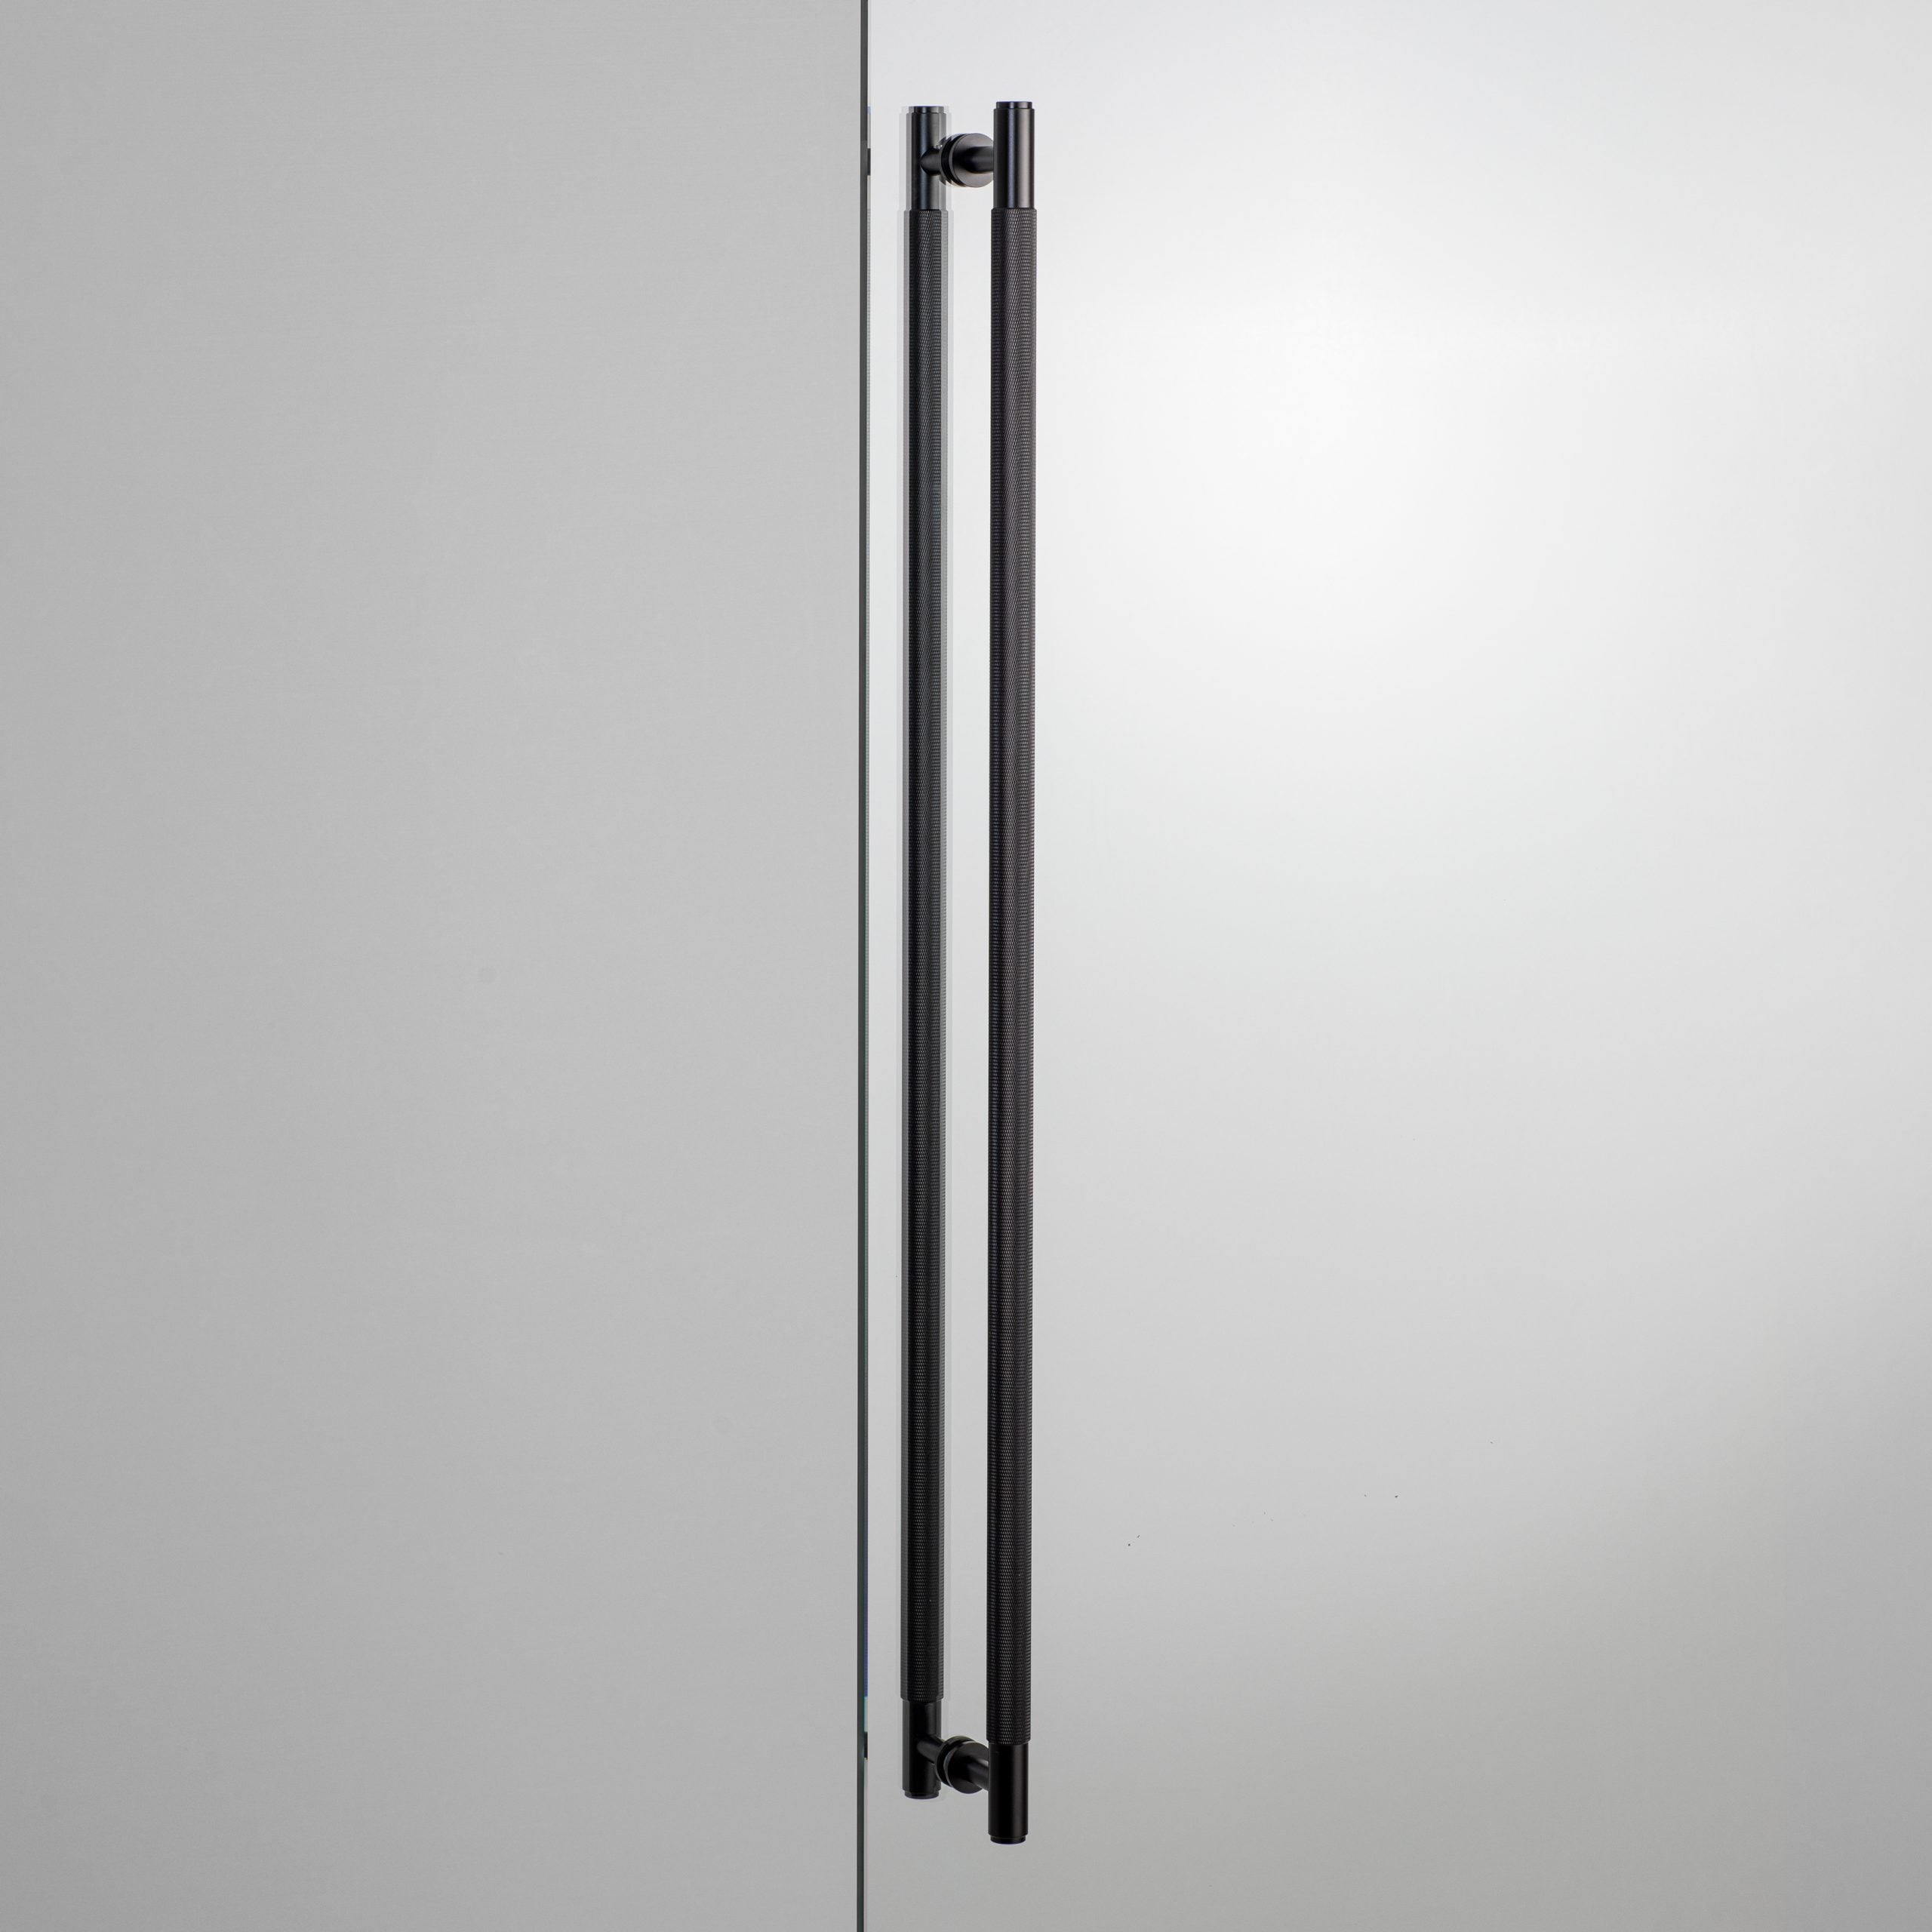 Buster + Punch 30.5 inch Double-sided Cross Knurl Closet Bar